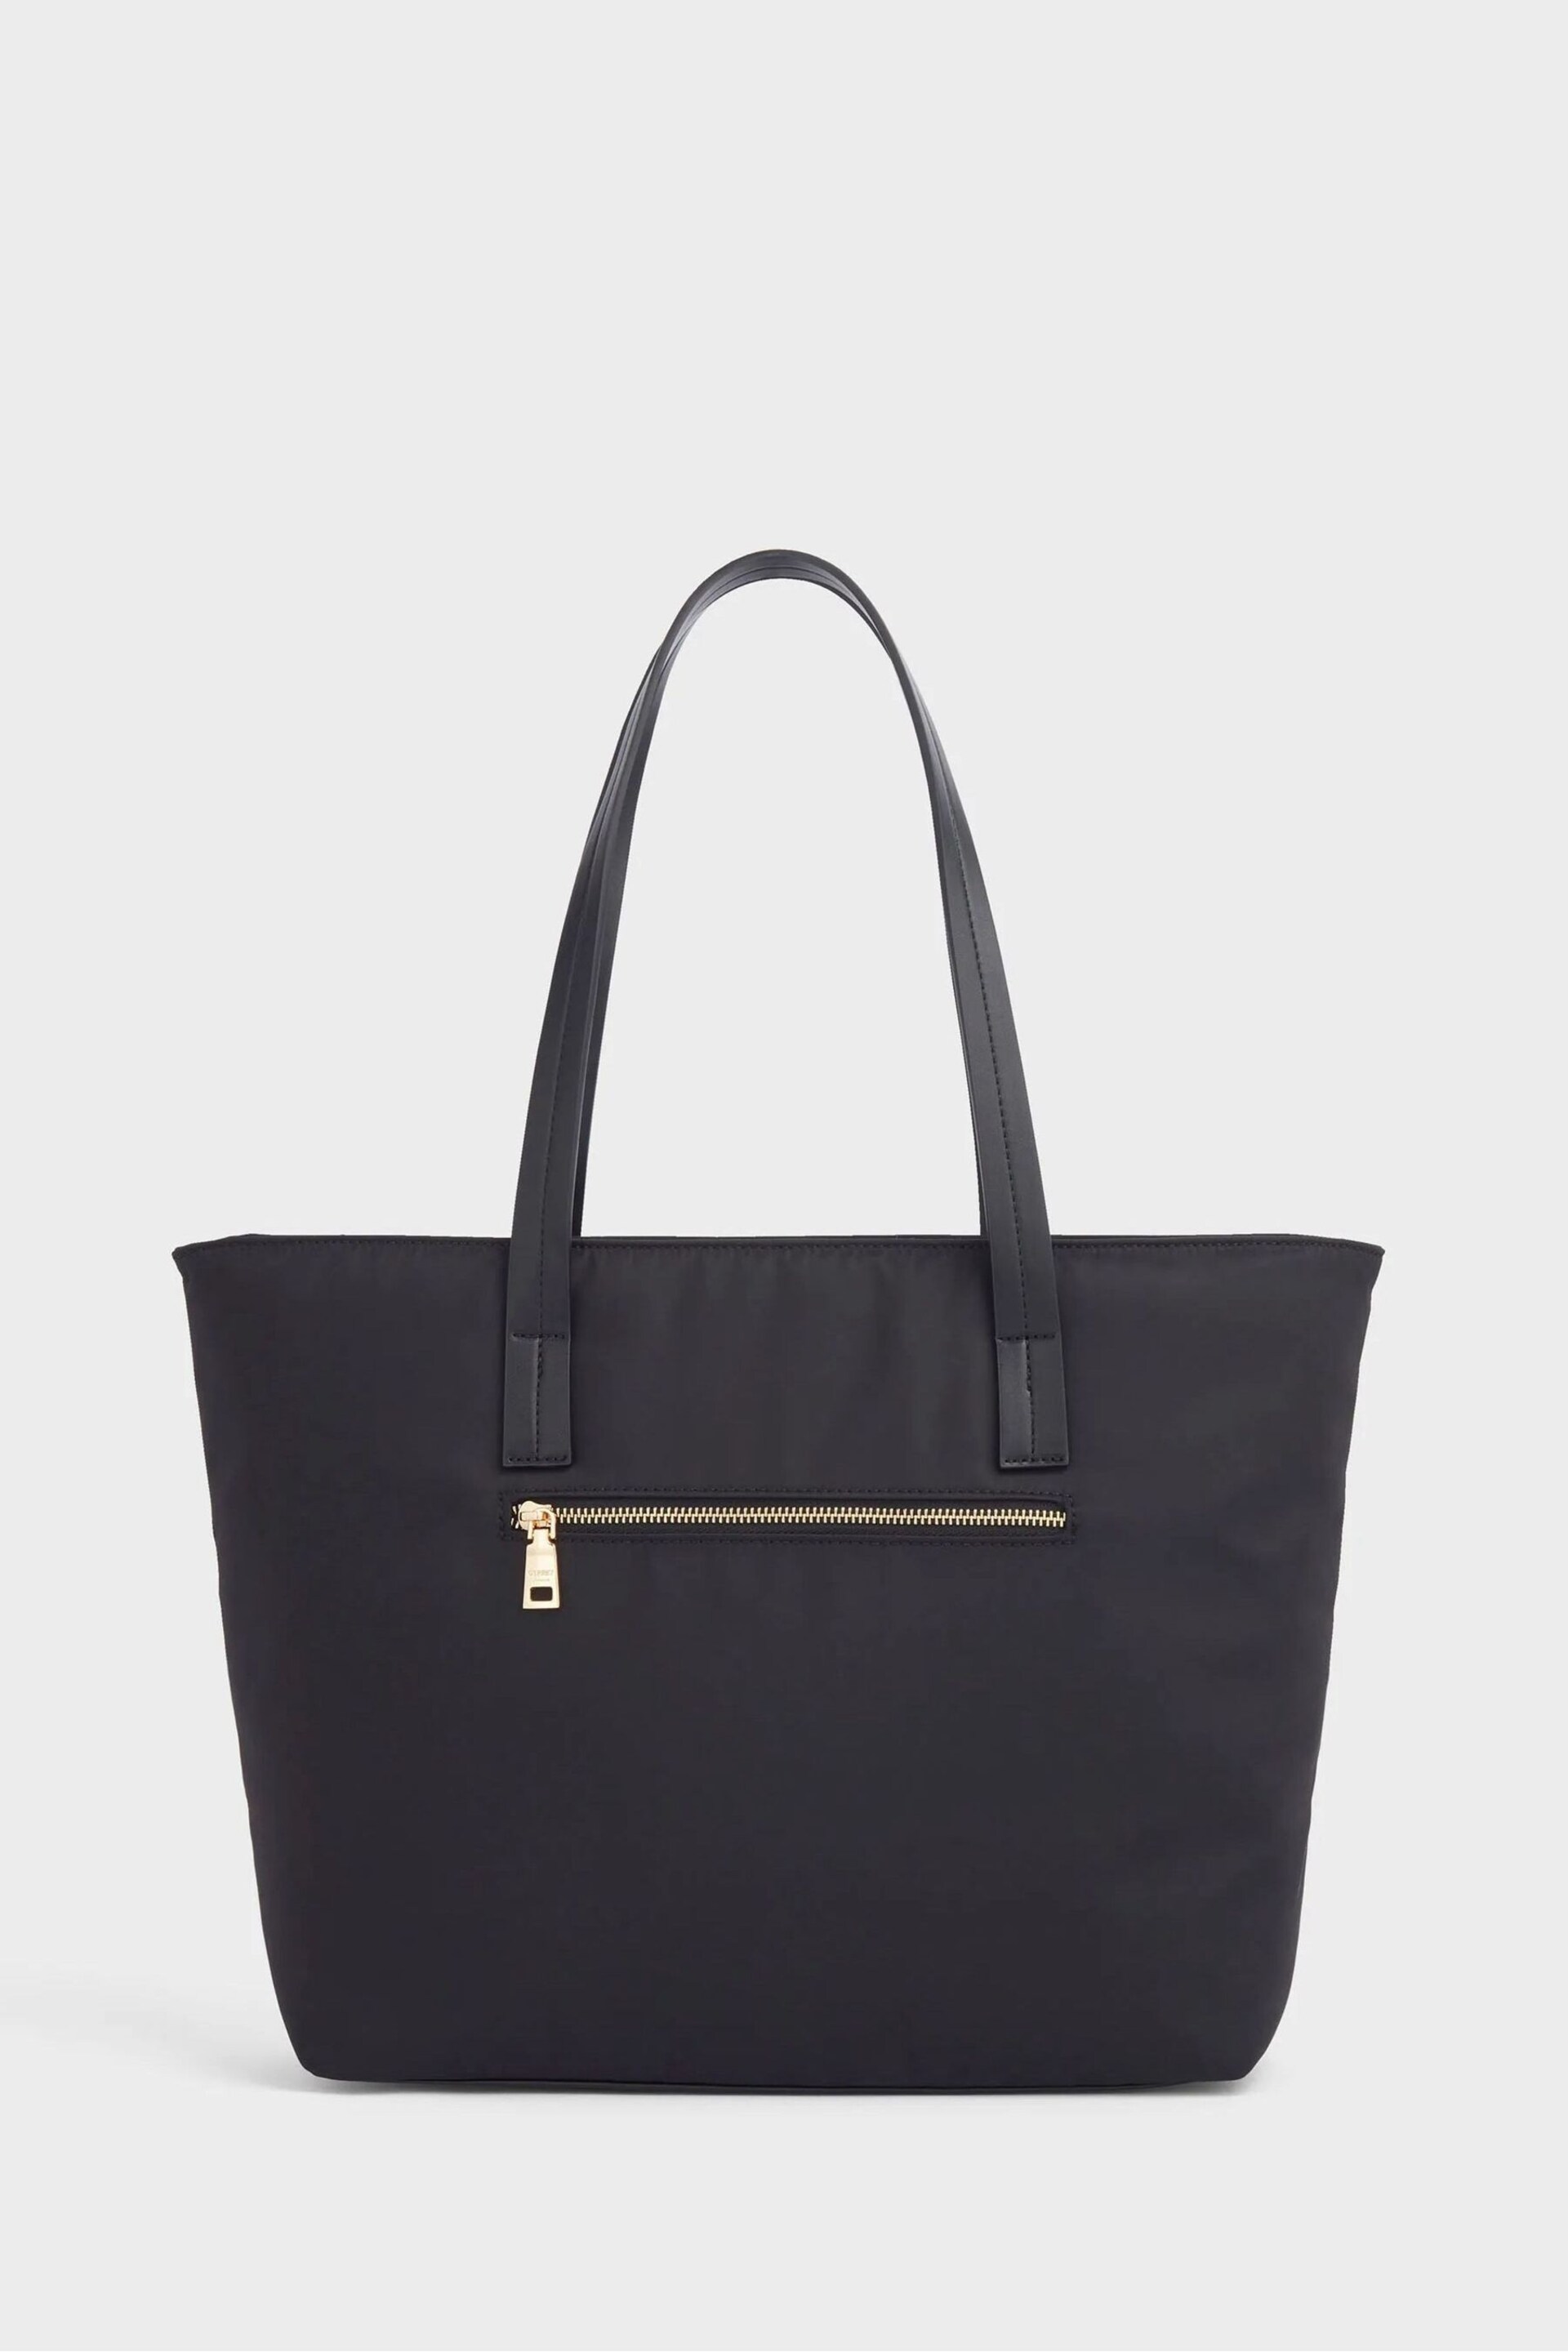 OSPREY LONDON The Wanderer Nylon Tote Bag With RFID Protection - Image 2 of 4